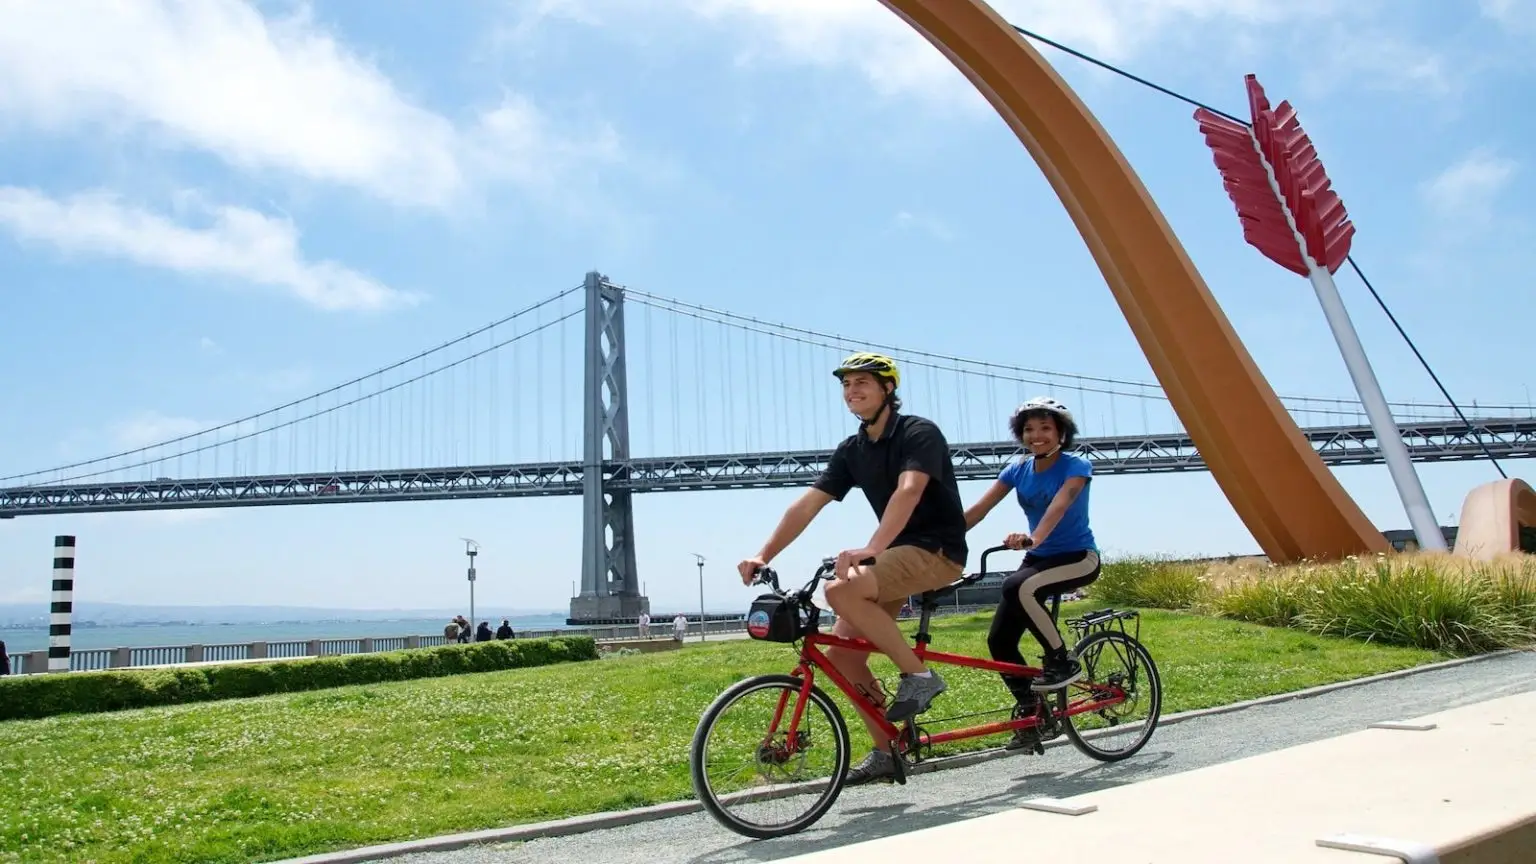 Two people ride a red tandem bicycle near a large arrow sculpture in a park. In the background, a suspension bridge spans across the blue sky with scattered clouds. The riders, perhaps discussing Top Food Tours in San Francisco, wear helmets and enjoy a sunny day. Green grass and a walking path surround them.